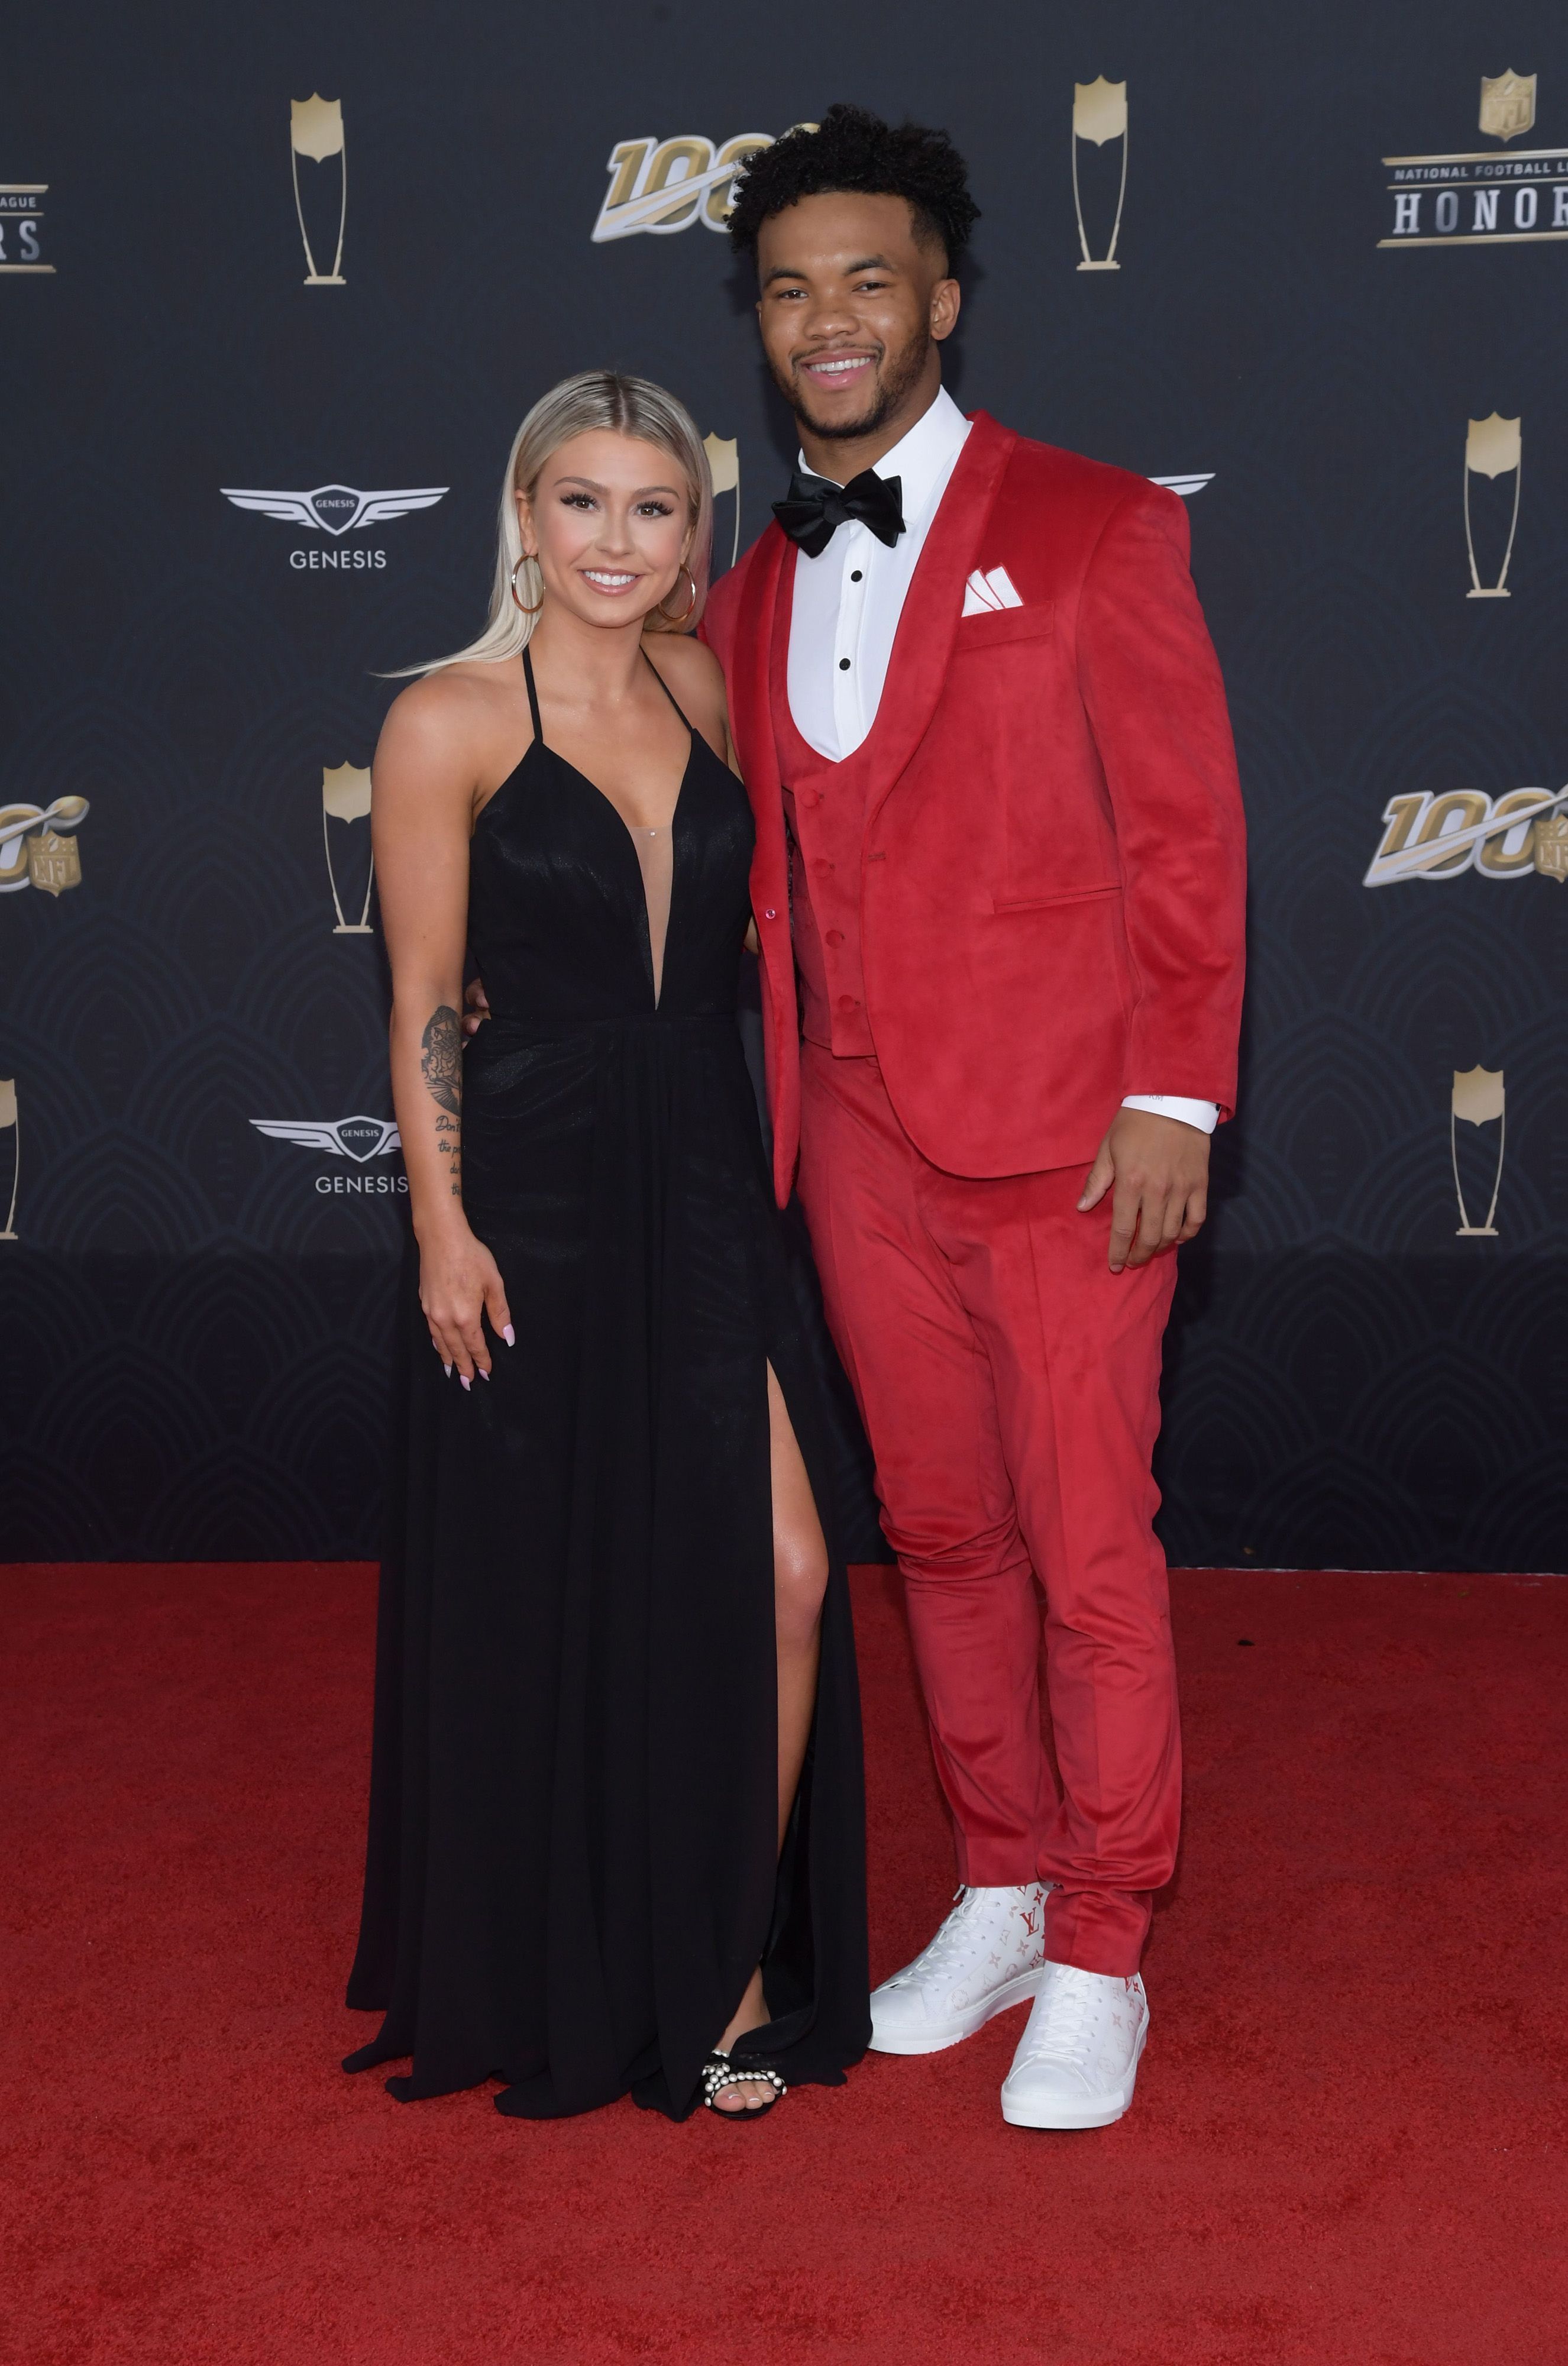 Morgan LeMasters and Kyler Murray at the 9th Annual NFL Honors in Miami, on February 1, 2020 | Source: Getty Images